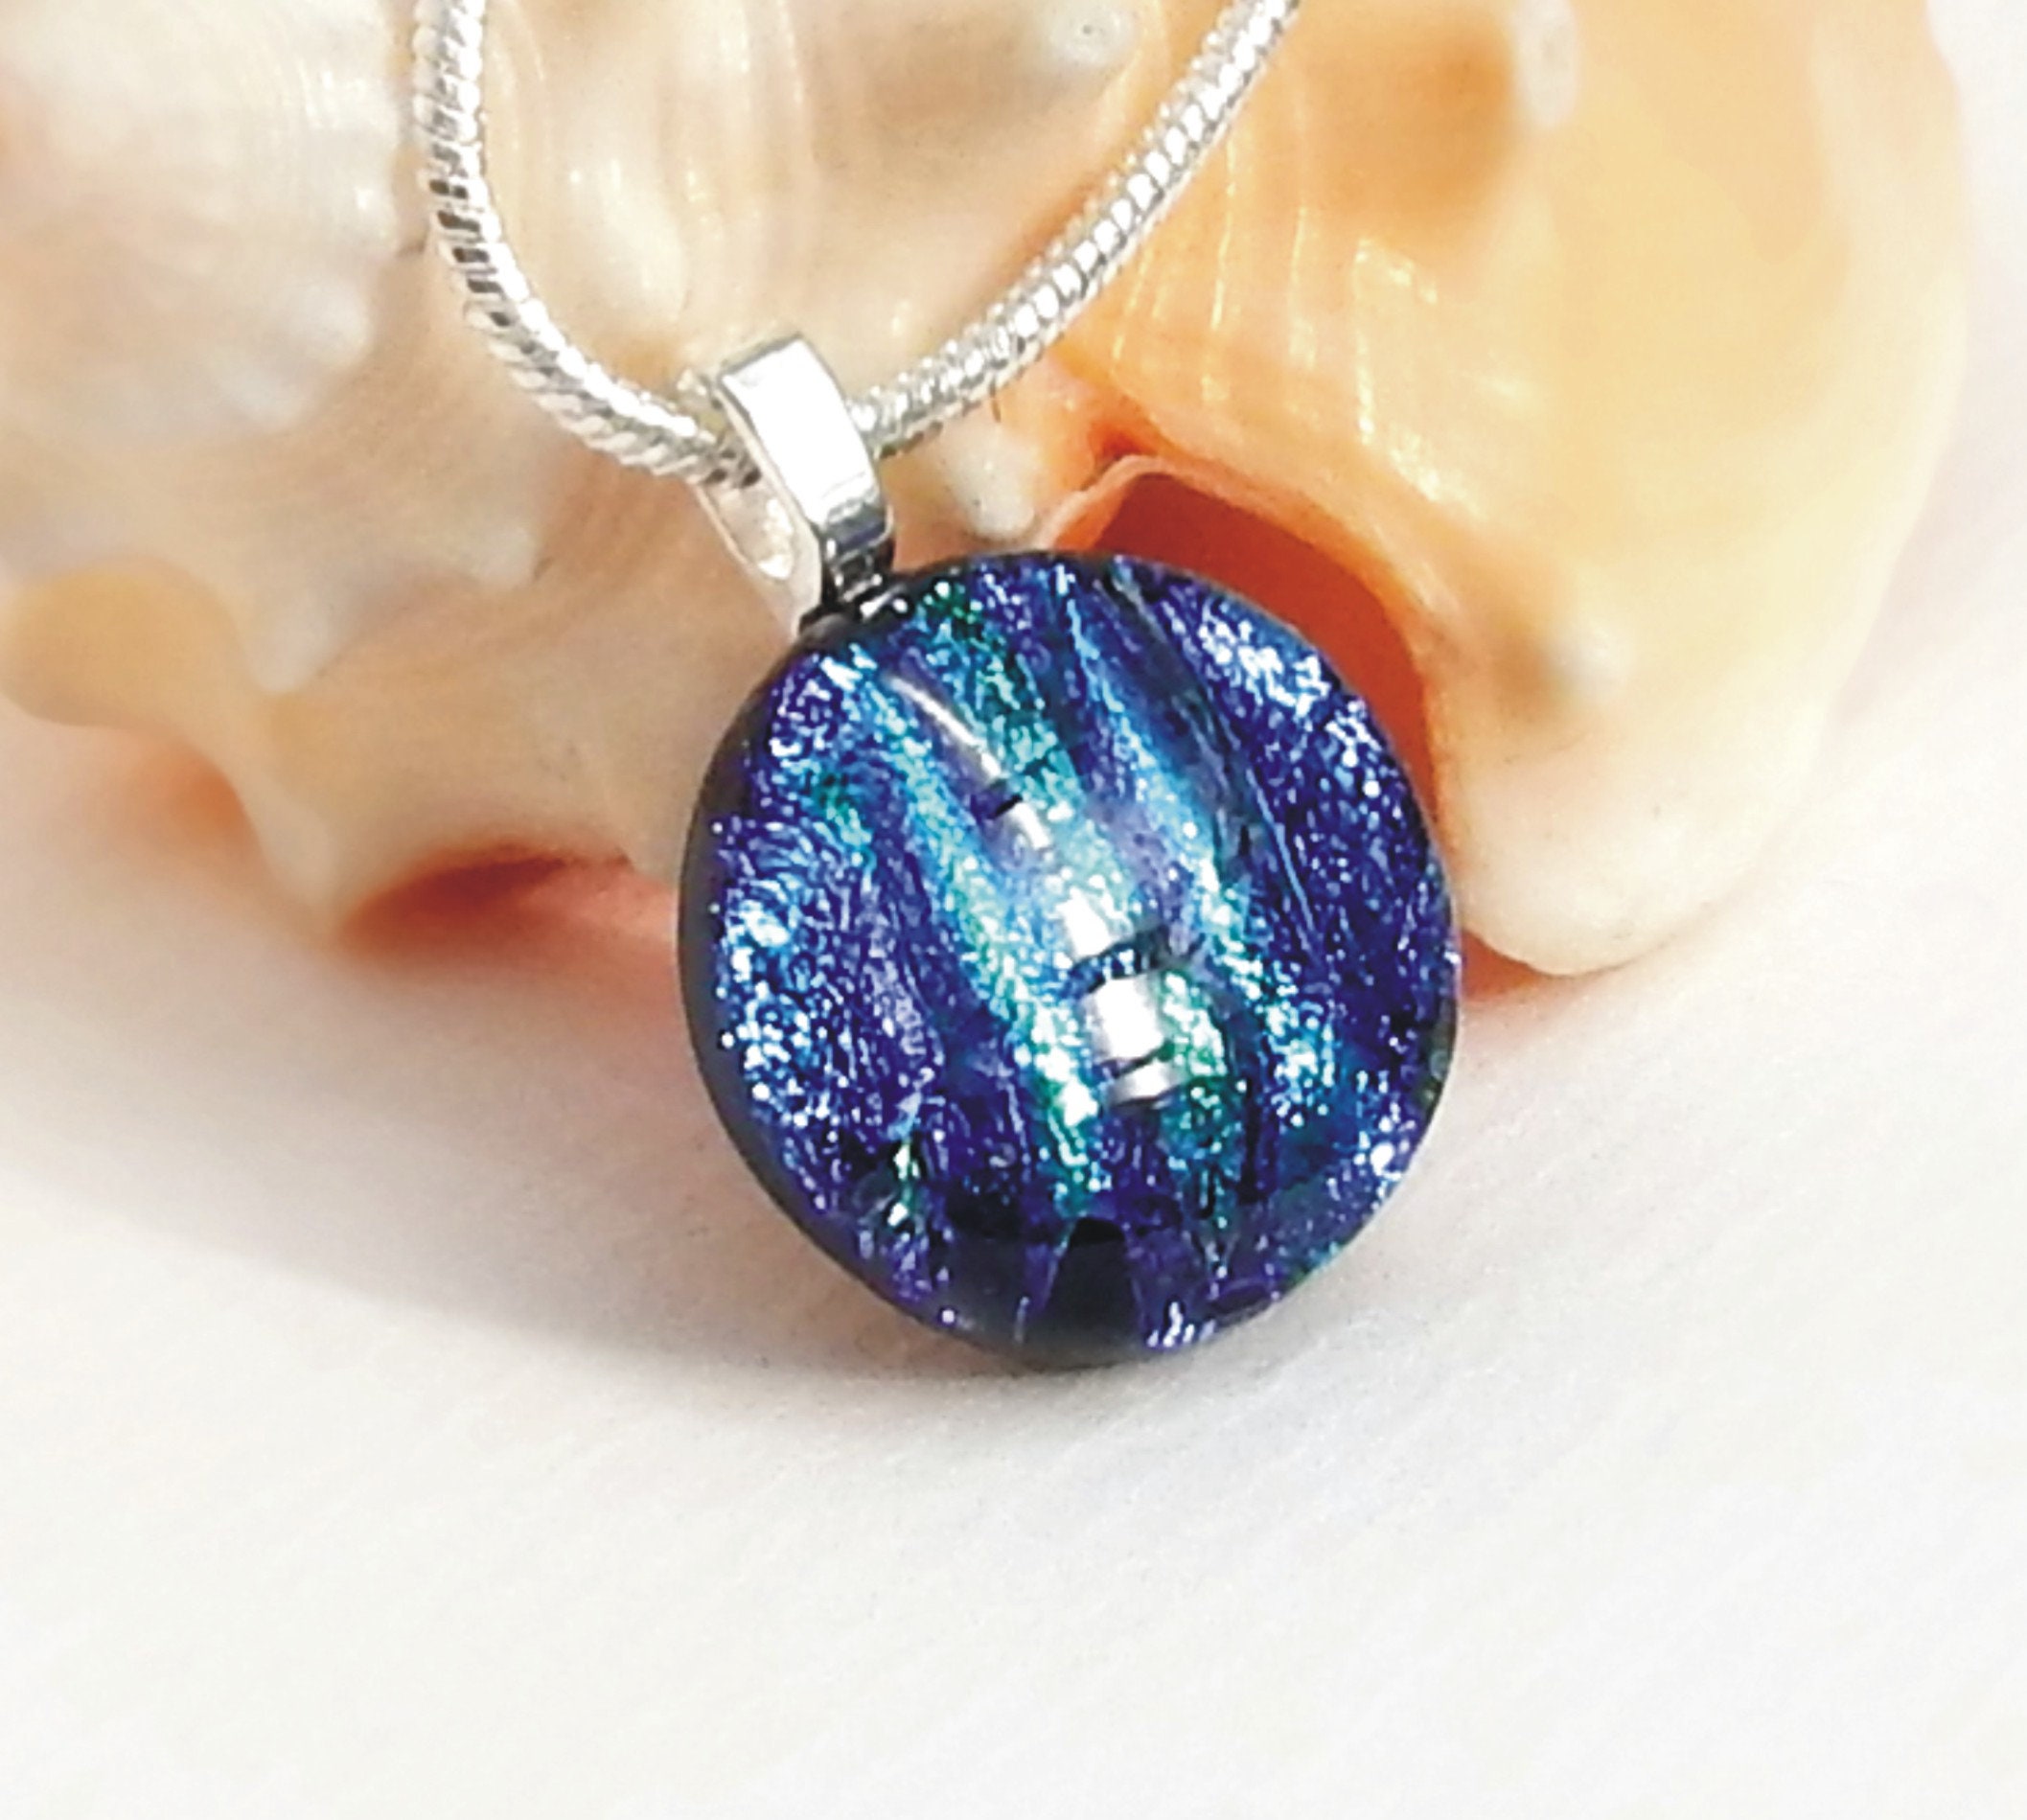 Galaxy Universe Necklace With Luminous Star And Moon Glass Cabochon Glass  Pendant Necklace Fashionable Hip Hop Jewelry With Fast Shipping From  Harrypotter_jewelry, $0.88 | DHgate.Com